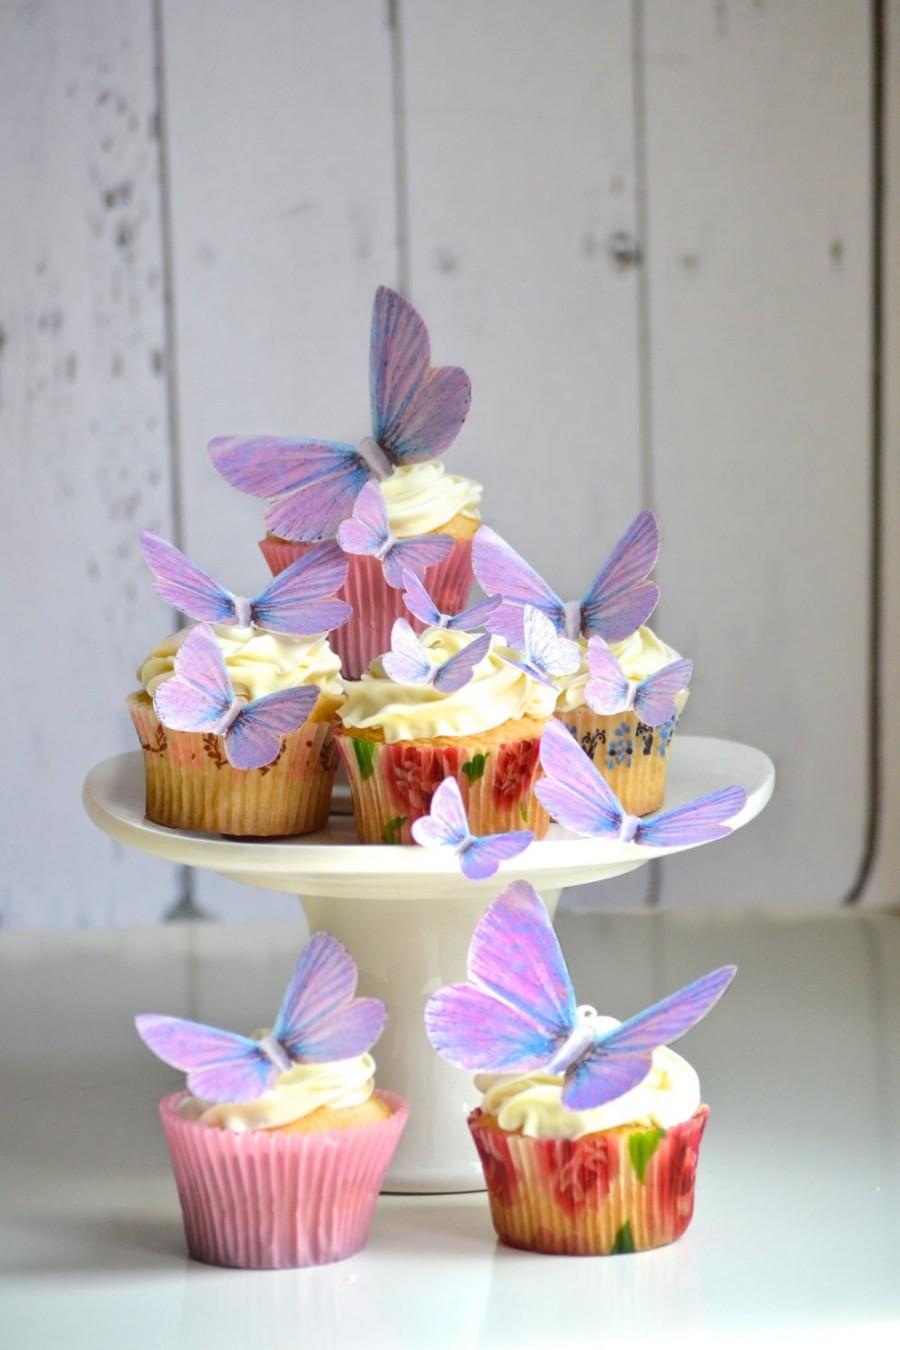 Mariage - Wedding Cake Topper Edible Butterflies in Lavender - Cake & Cupcake toppers - Food decorations - Edible Wedding Favor